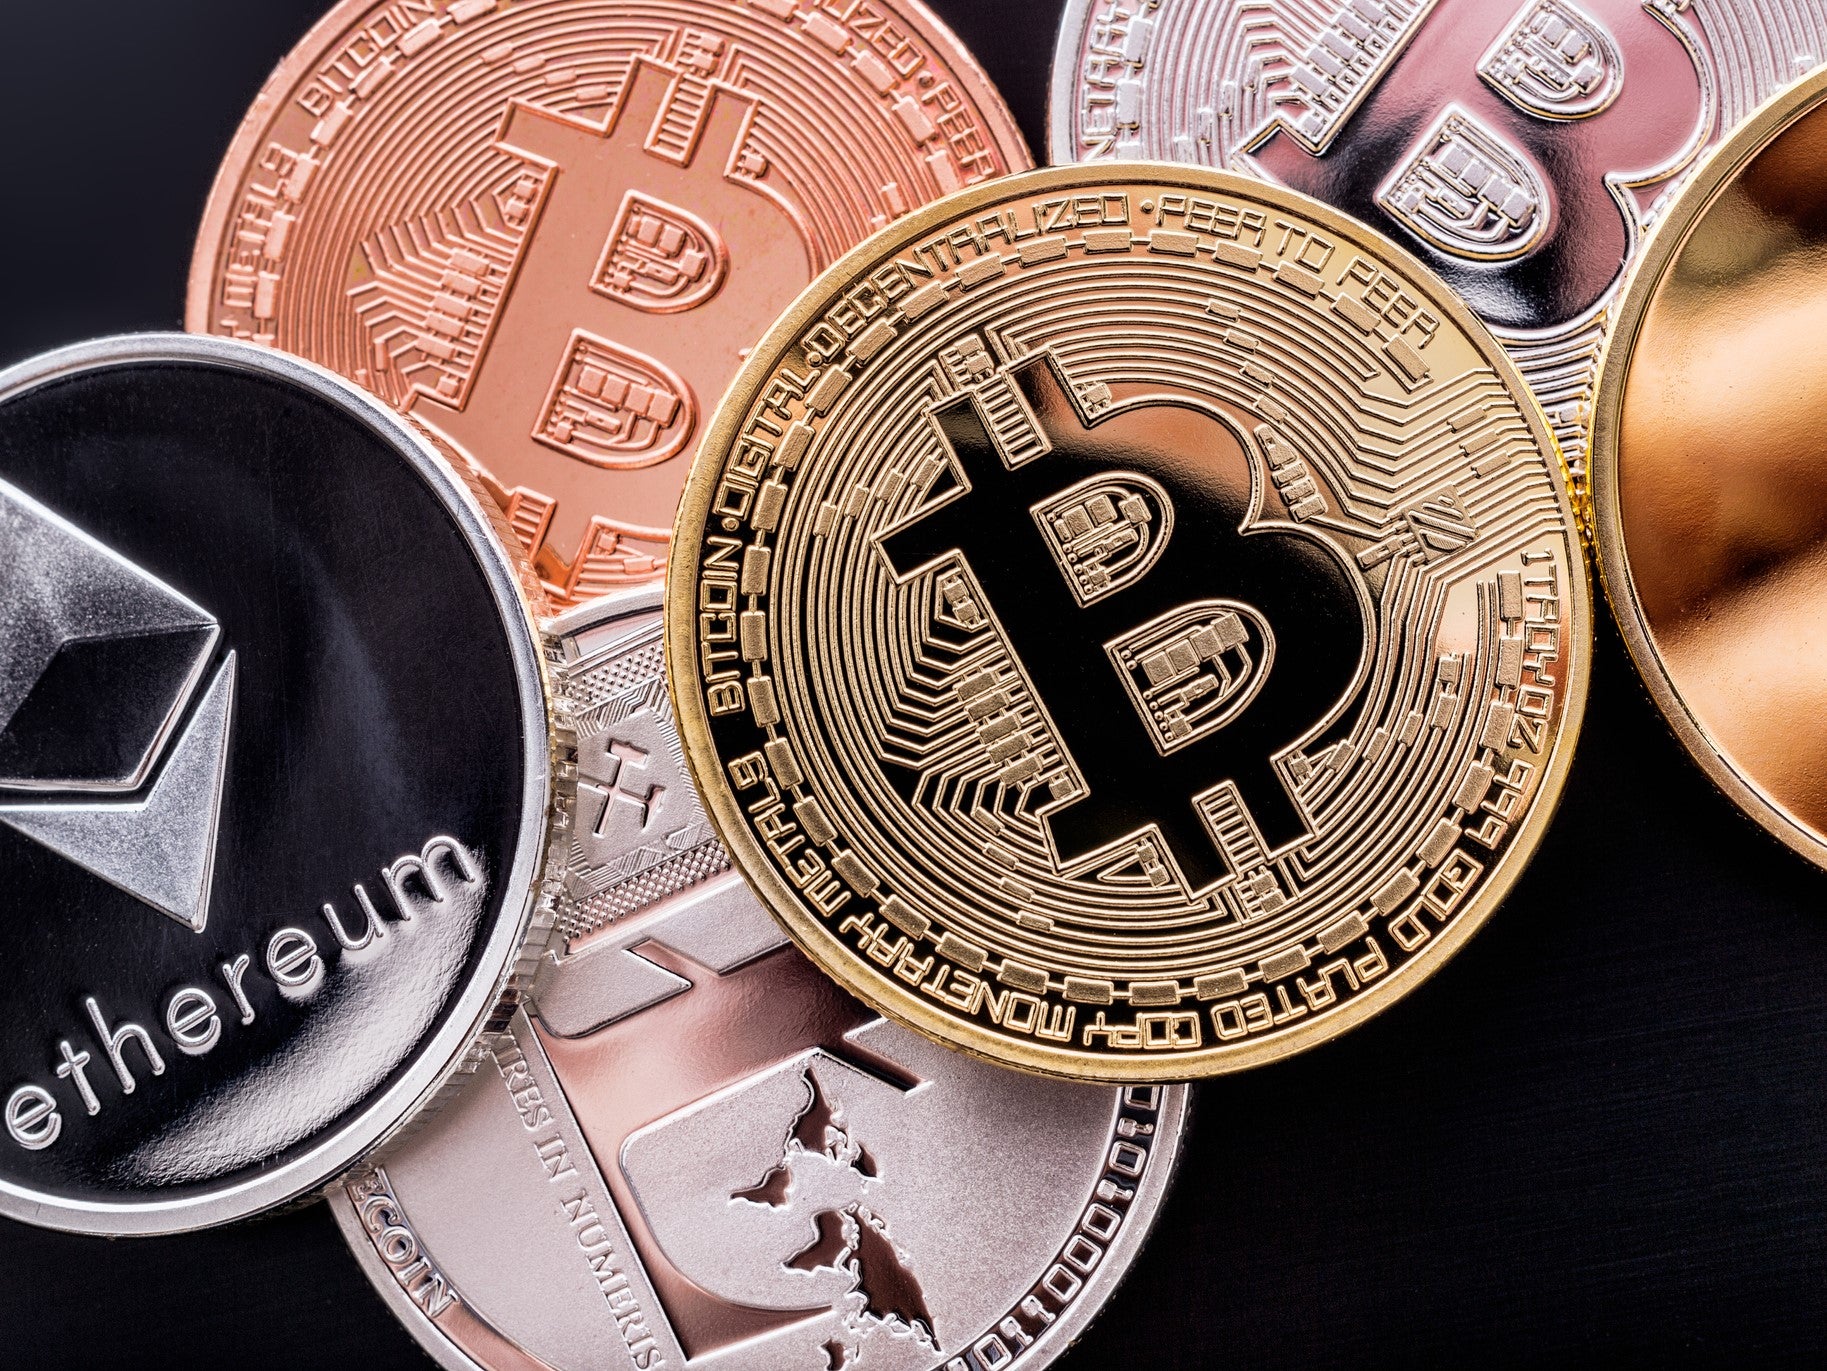 The cryptocurrency market was exceptionally volatile between mid April and early June 2021